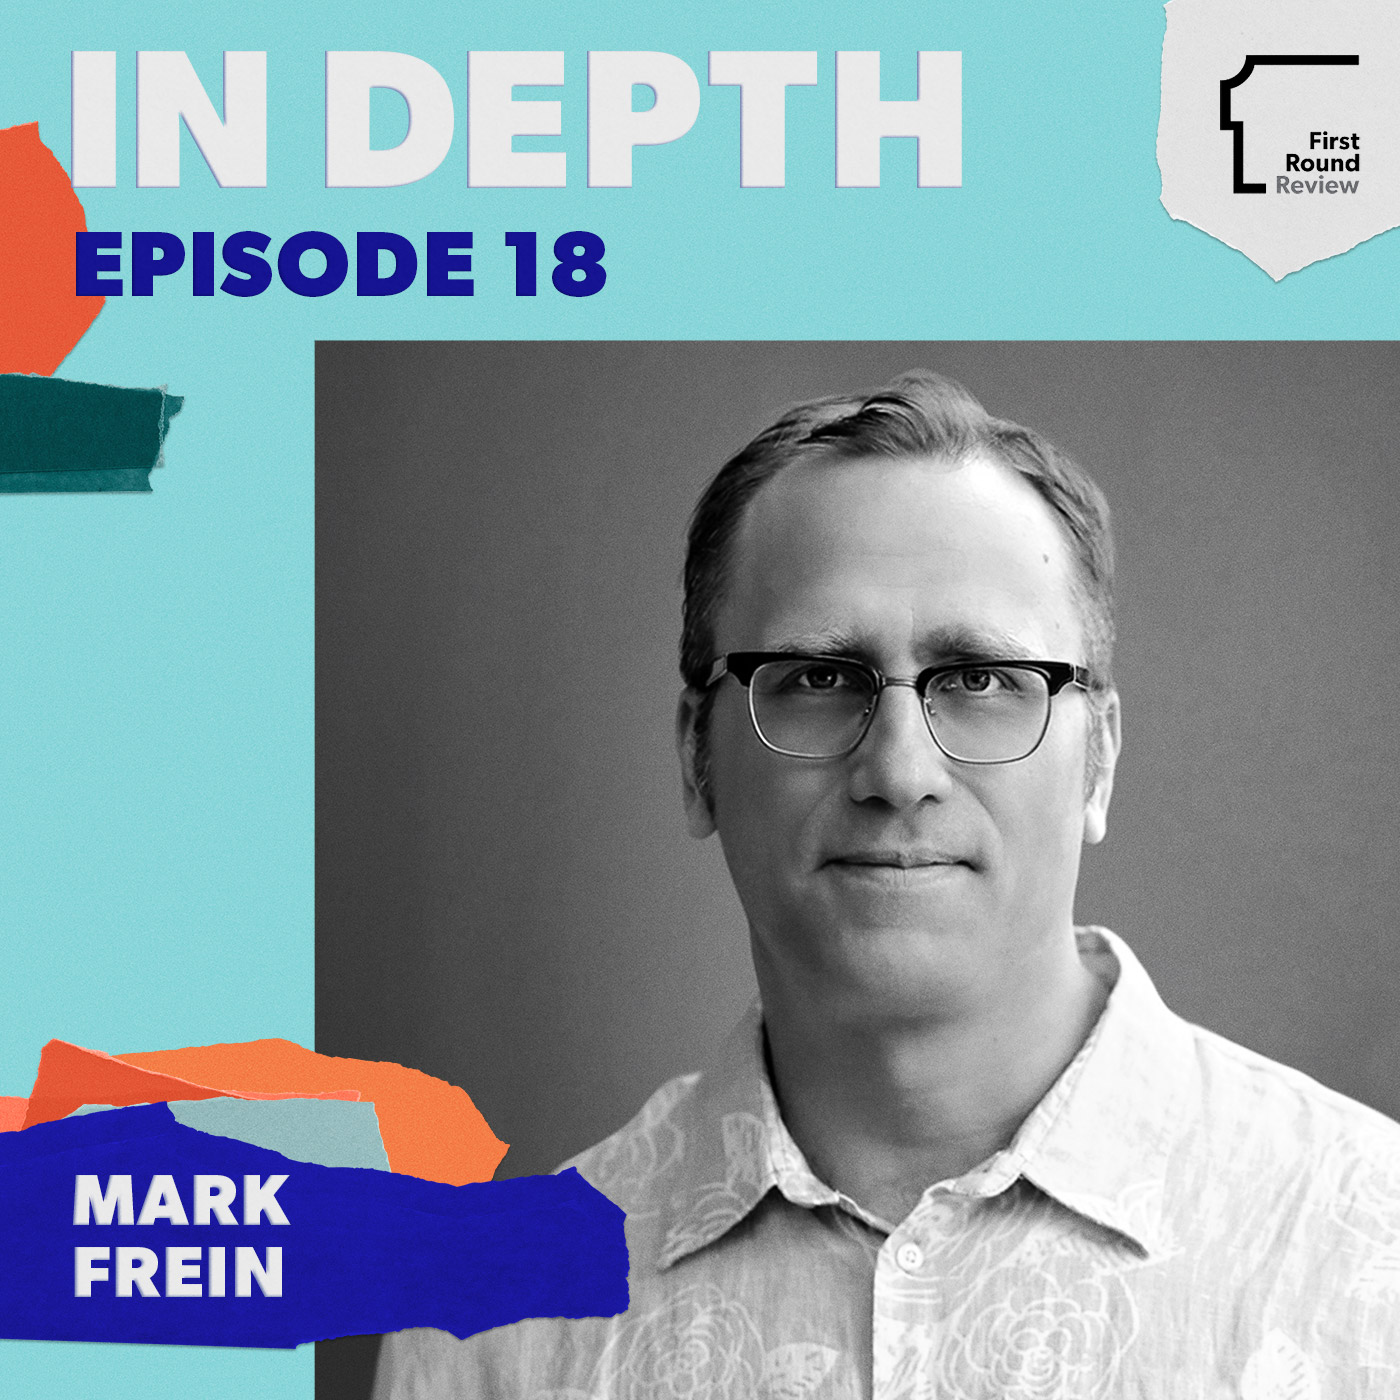 Setting up the people function and training for empathy — Lambda School’s Mark Frein